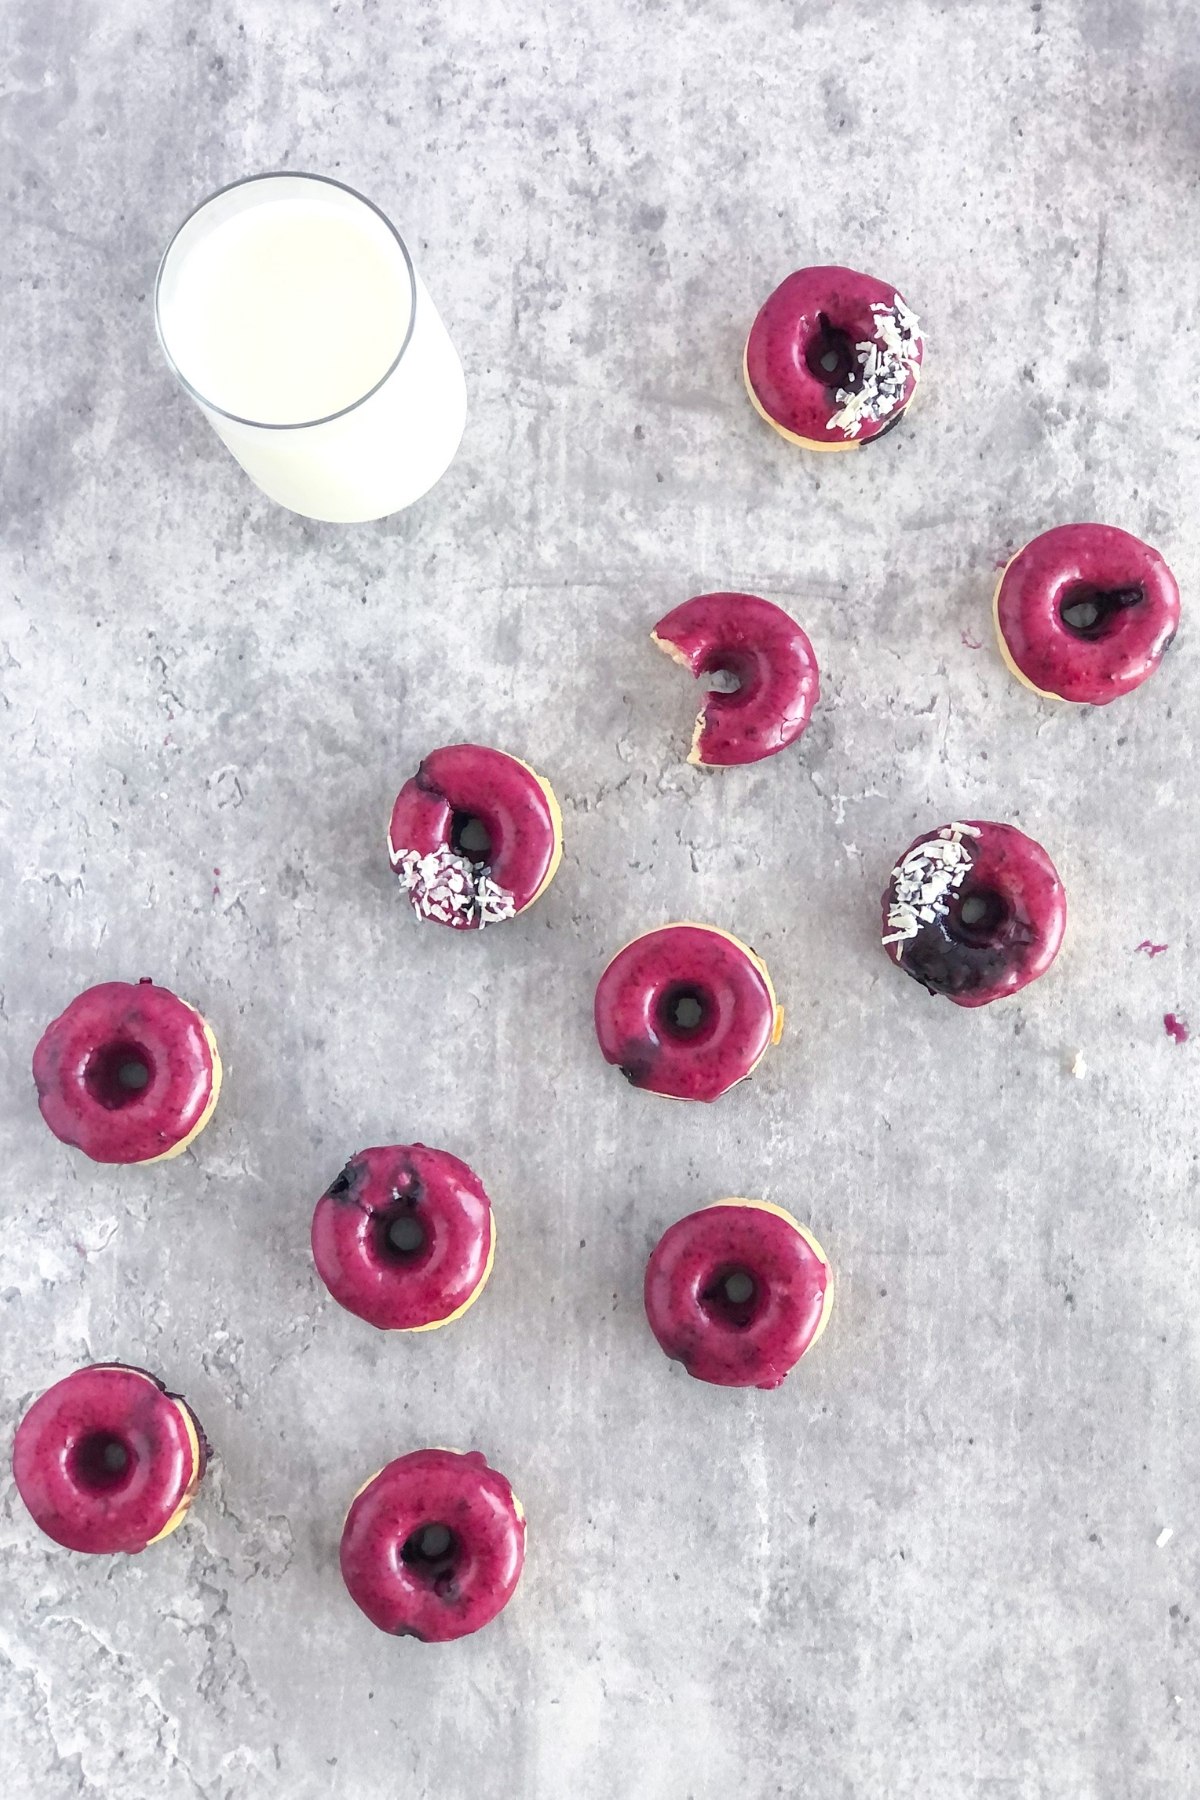 mini baked donuts with blueberry glaze and shredded coconut